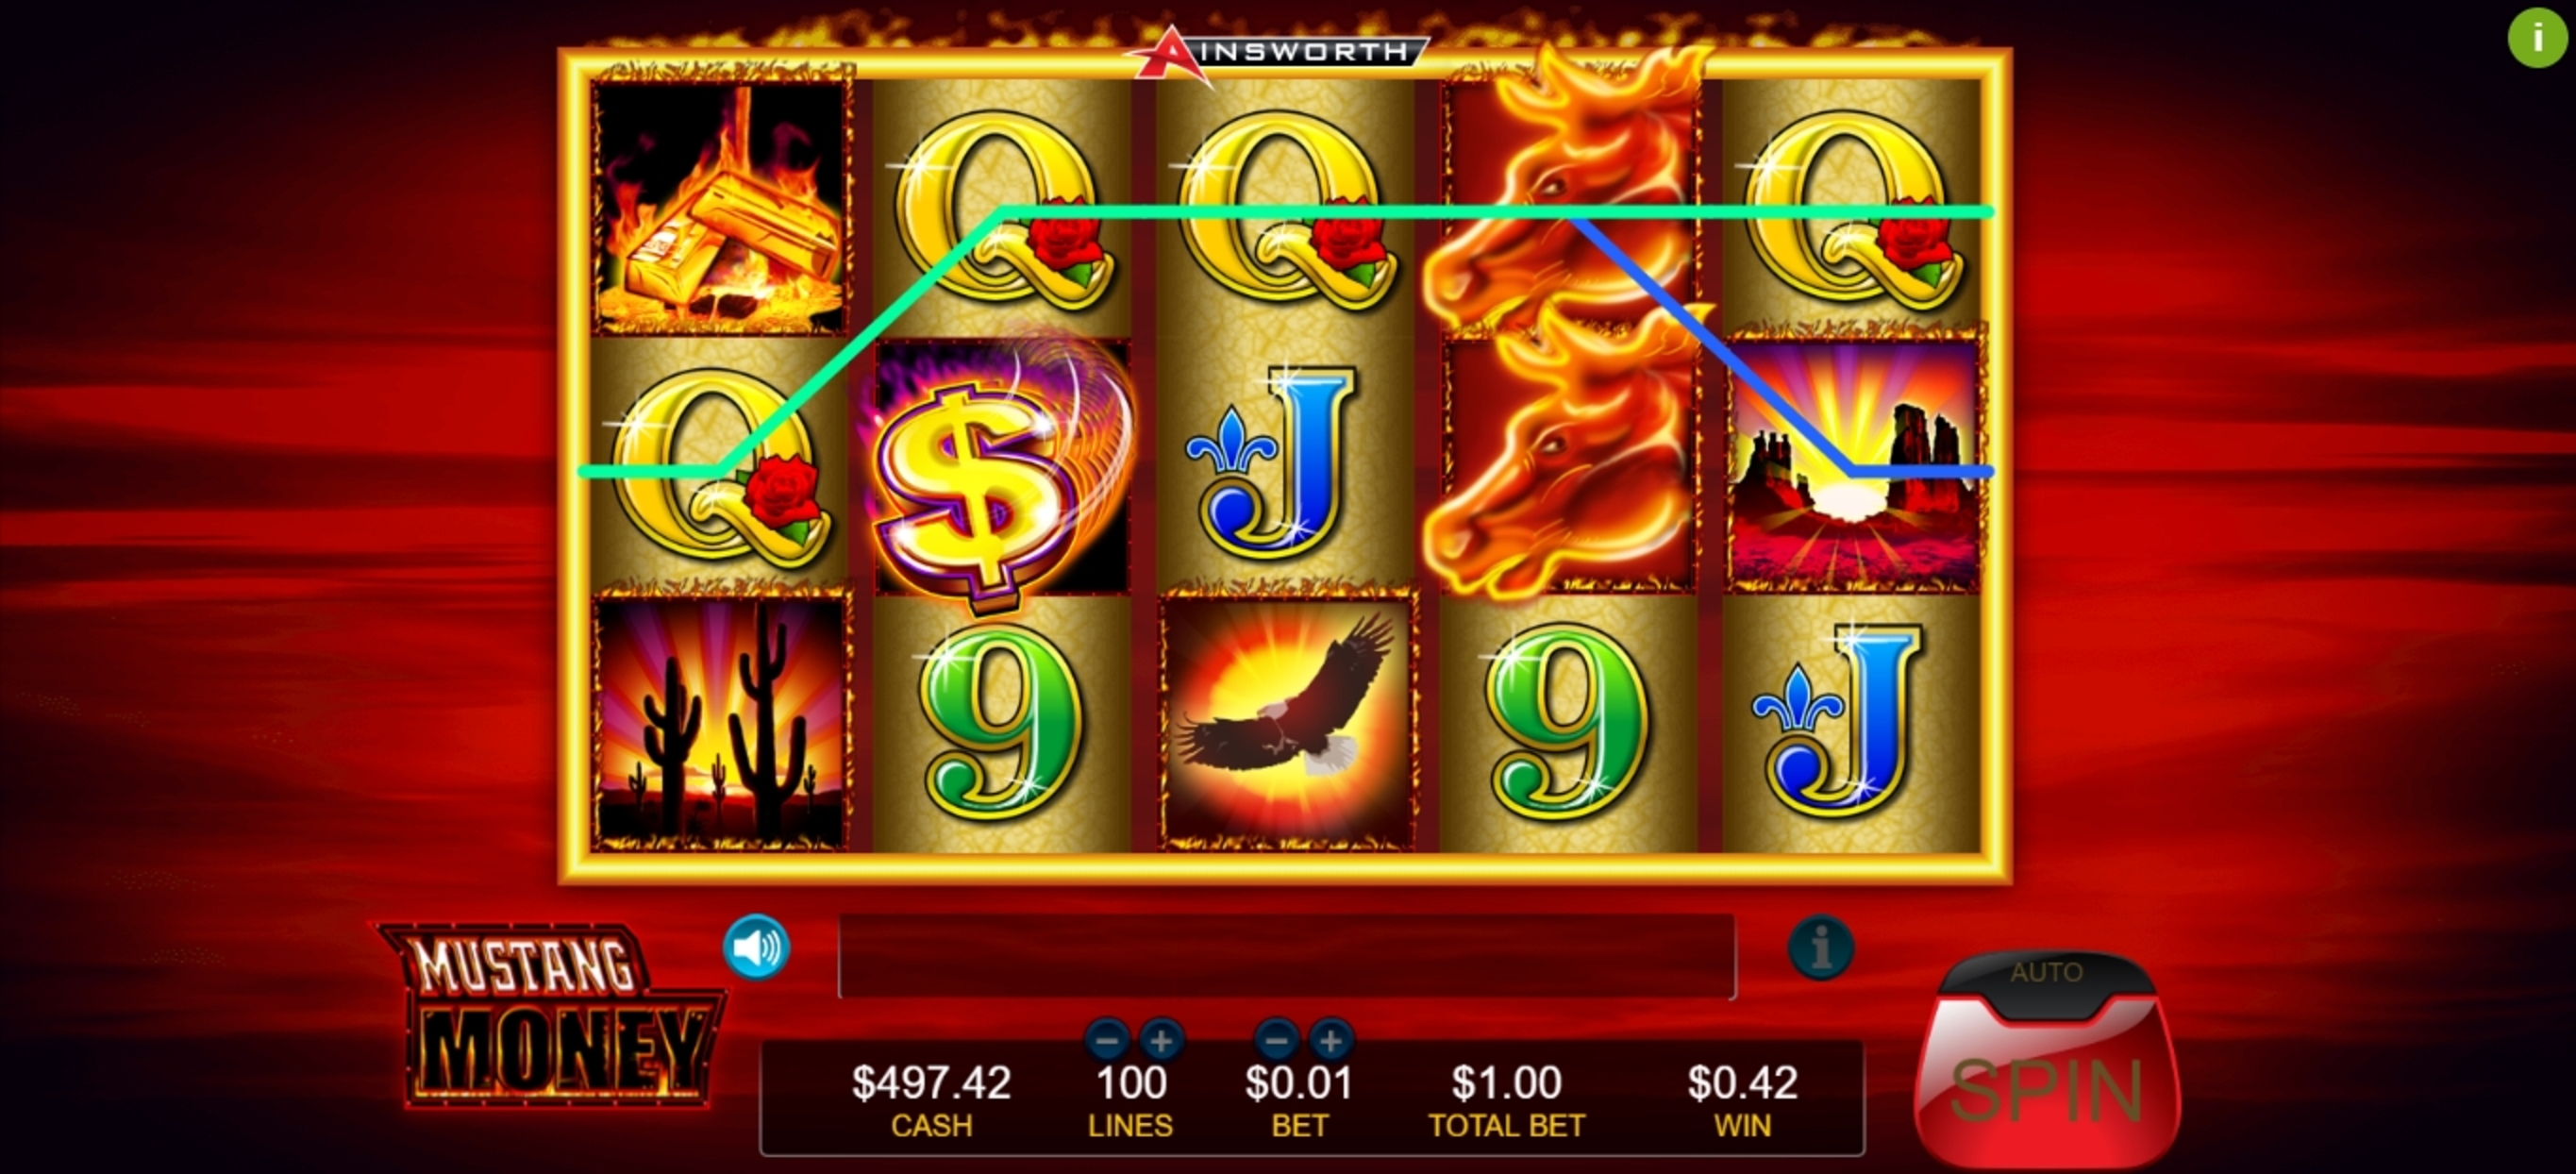 Win Money in Mustang Money Free Slot Game by Ainsworth Gaming Technology